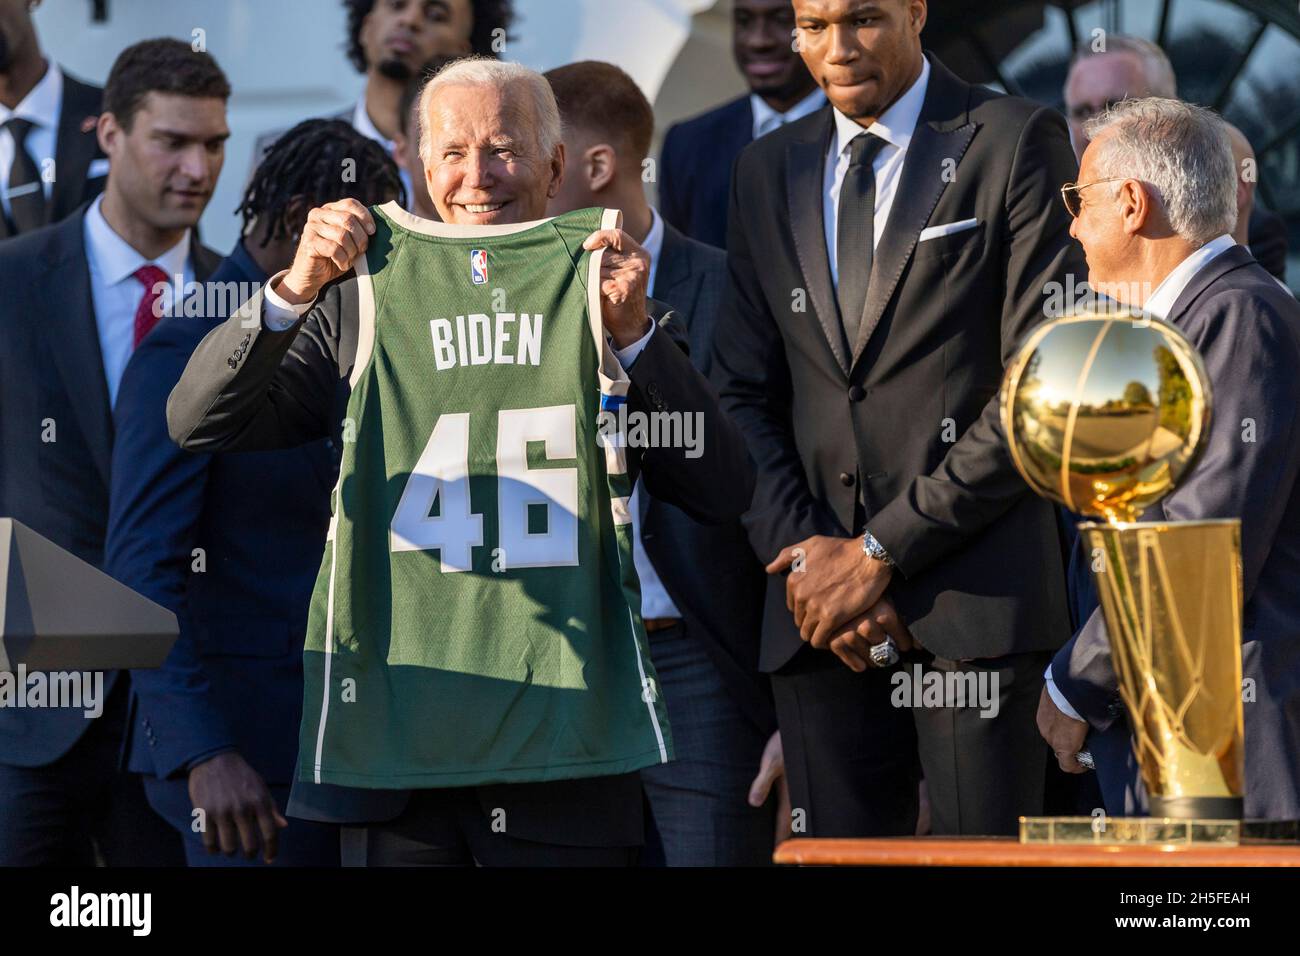 Washington, United States Of America. 08th Nov, 2021. Washington, United States of America. 08 November, 2021. U.S President Joe Biden is presented a team jersey during a gathering to celebrate the 2021 NBA Champion Milwaukee Bucks basketball team on the South Lawn of the White House November 8, 2021 in Washington, DC Credit: Adam Schultz/White House Photo/Alamy Live News Stock Photo